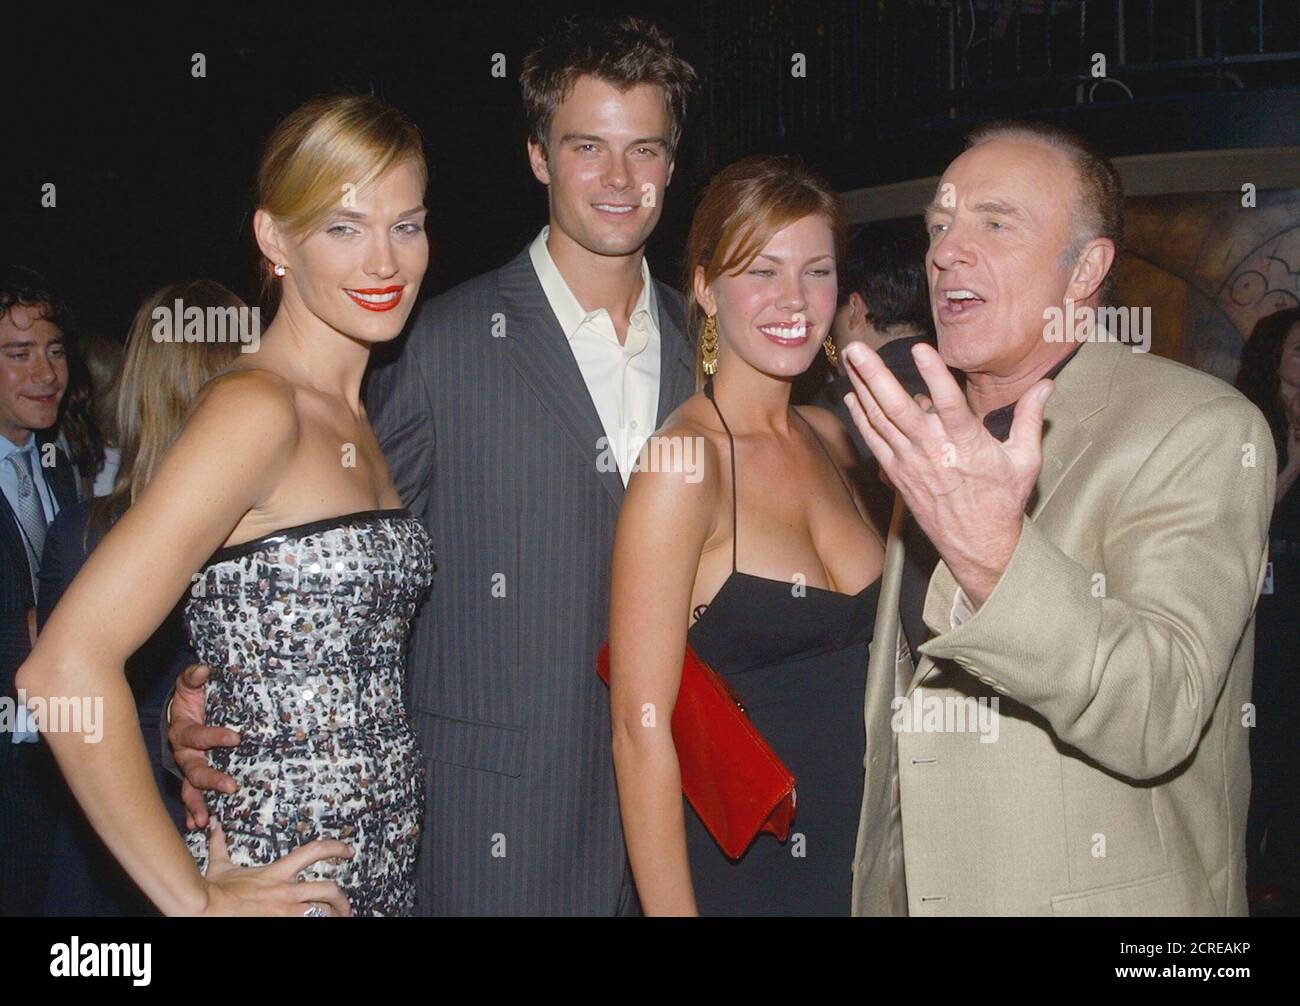 Molly Sims, Josh Duhamel, Nikki Cox and James Caan (L-R), cast members in  the new NBC drama series "Las Vegas," share a light moment as they pose  following the premiere screening of